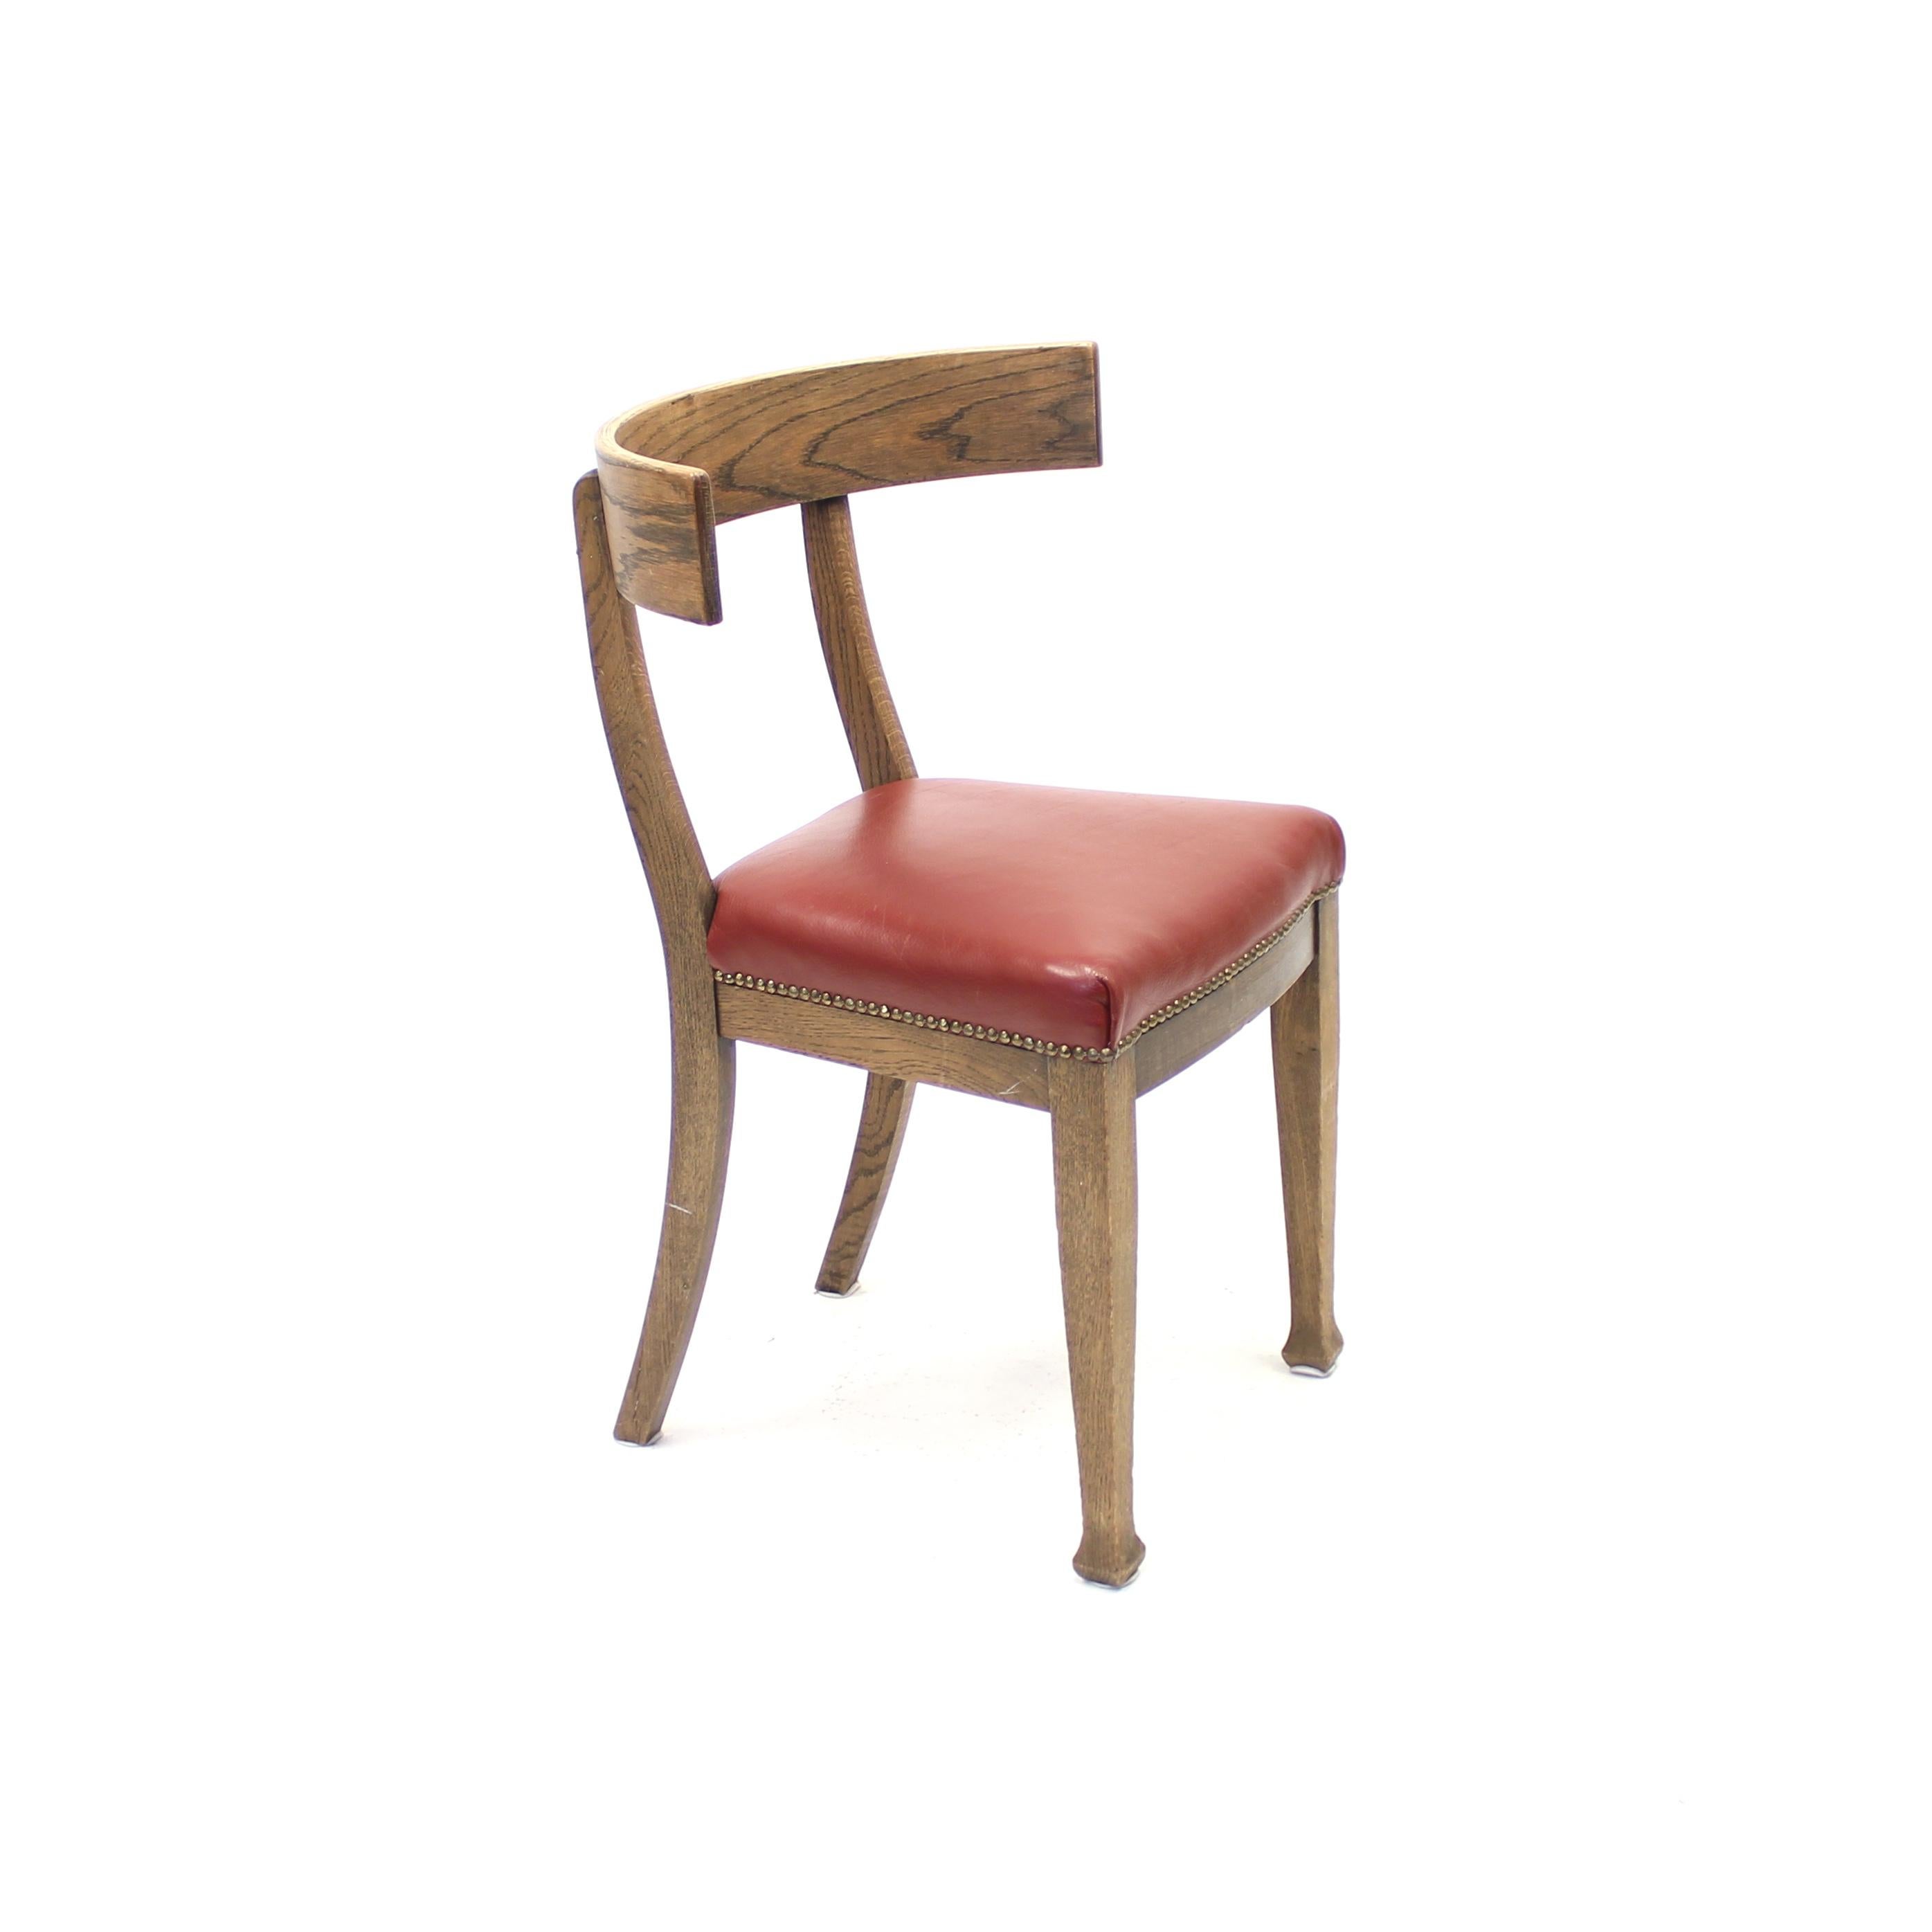 Swedish Oak and Leather Klismos Chair, Early 20th Century